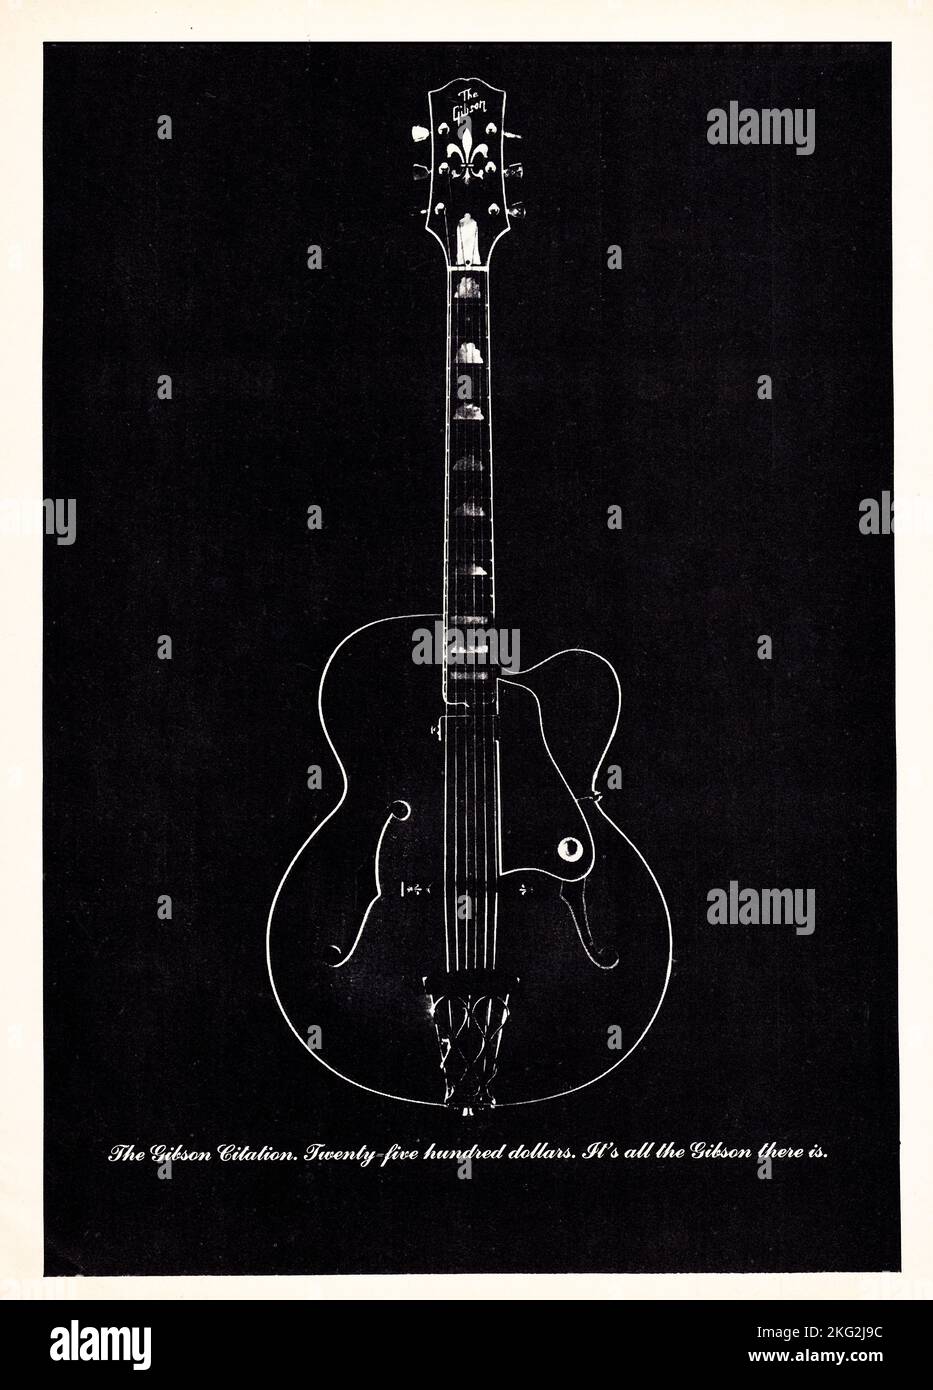 A minimalist advertisement from a 1969 music magazine for the Gibson Citation guitar It was the most ornate, labor intensive and costly production instrument the firm had ever made. With a staggering $2500 price tag, the guitar was over twice as expensive as the Super 400CN, until then Gibson's top-line acoustic archtop. Stock Photo